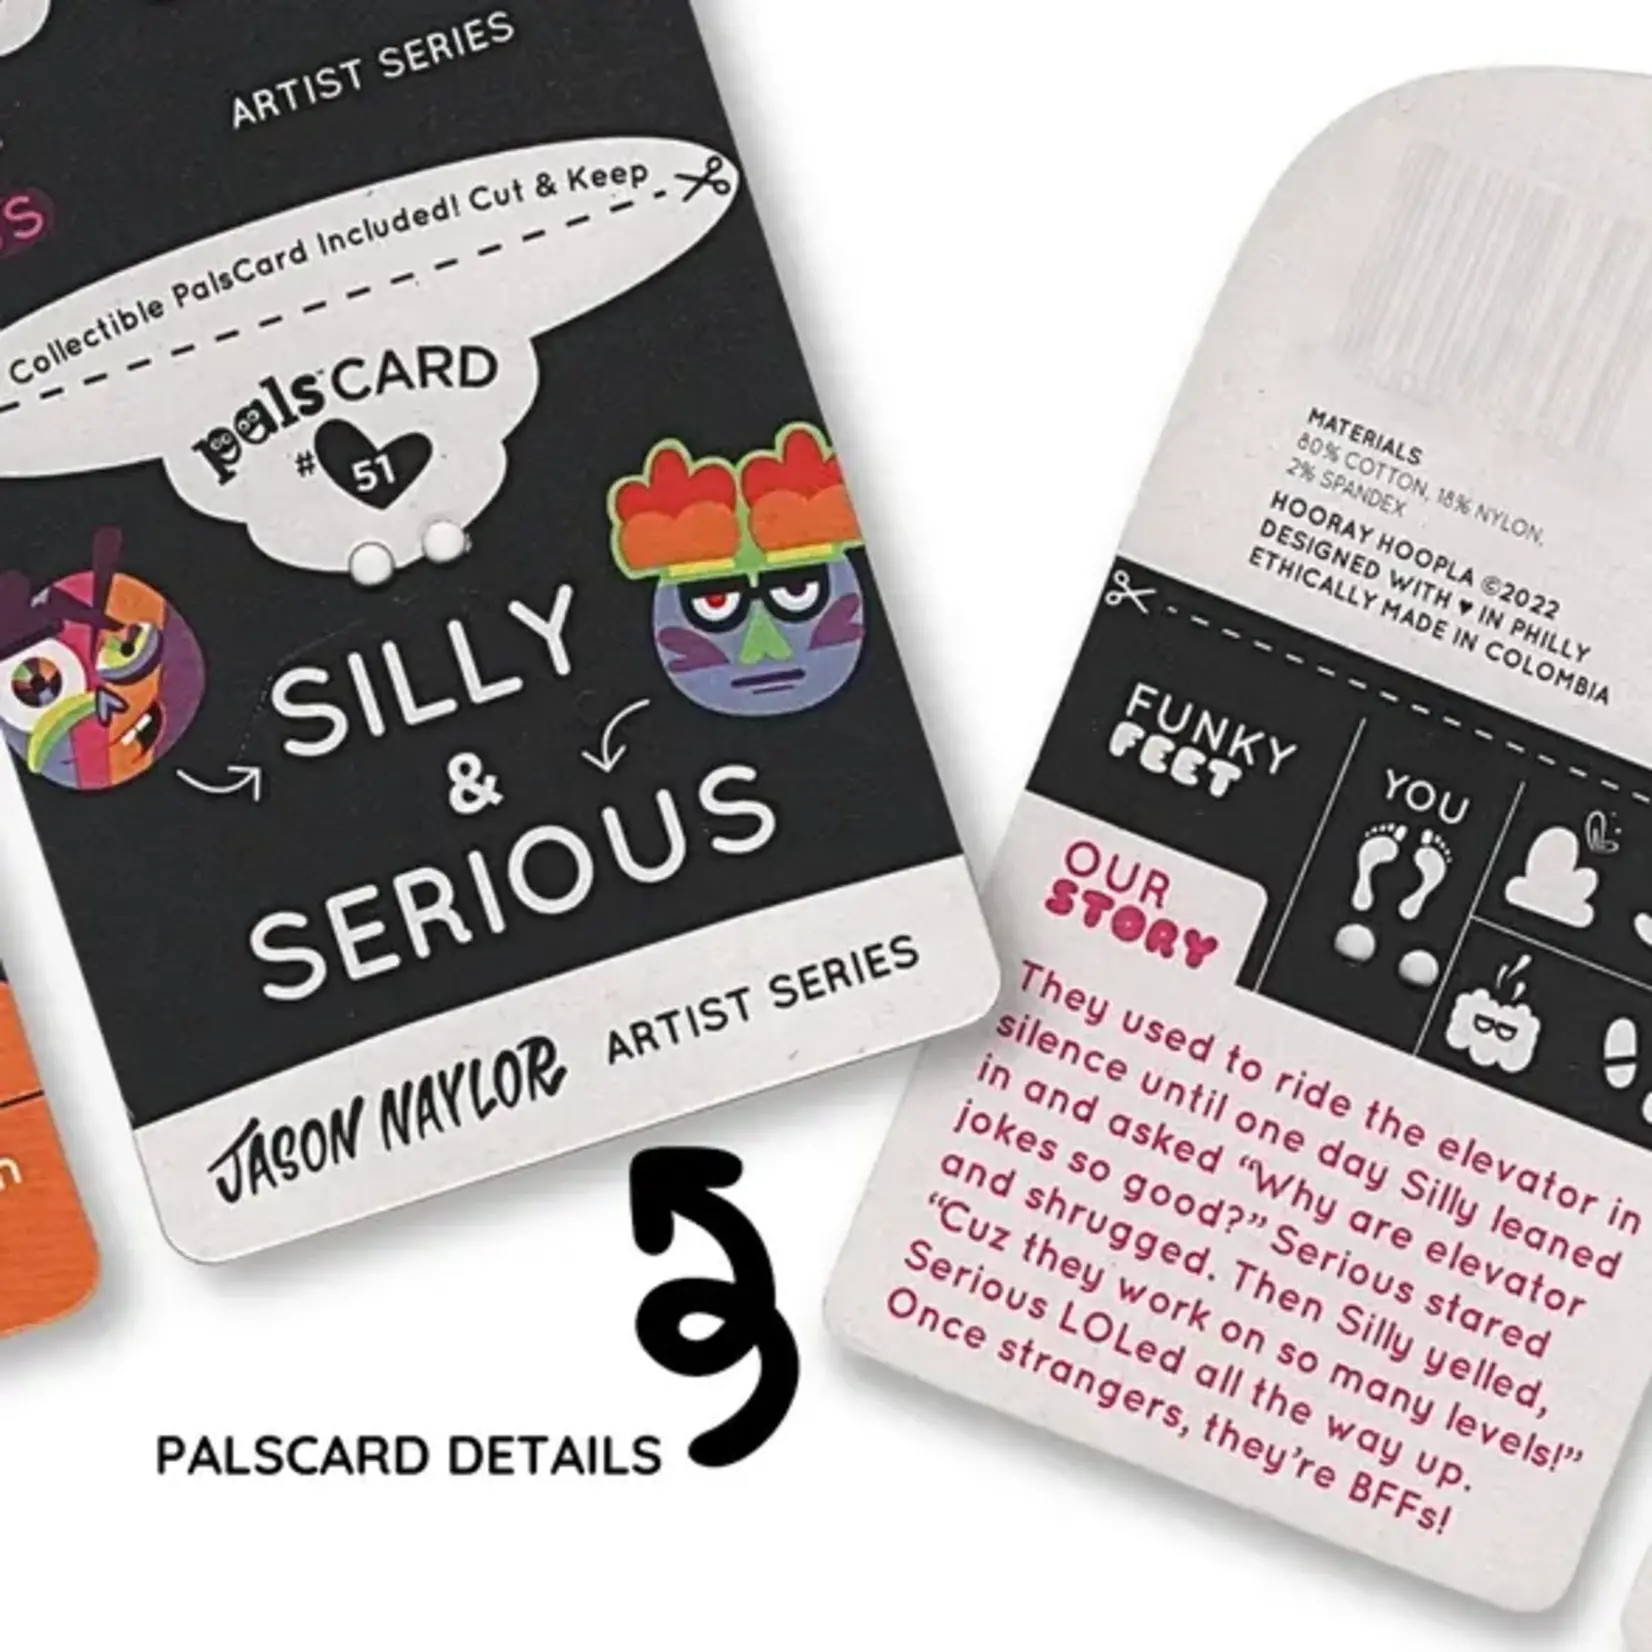 Pals Socks - Silly & Serious, Adult 13+